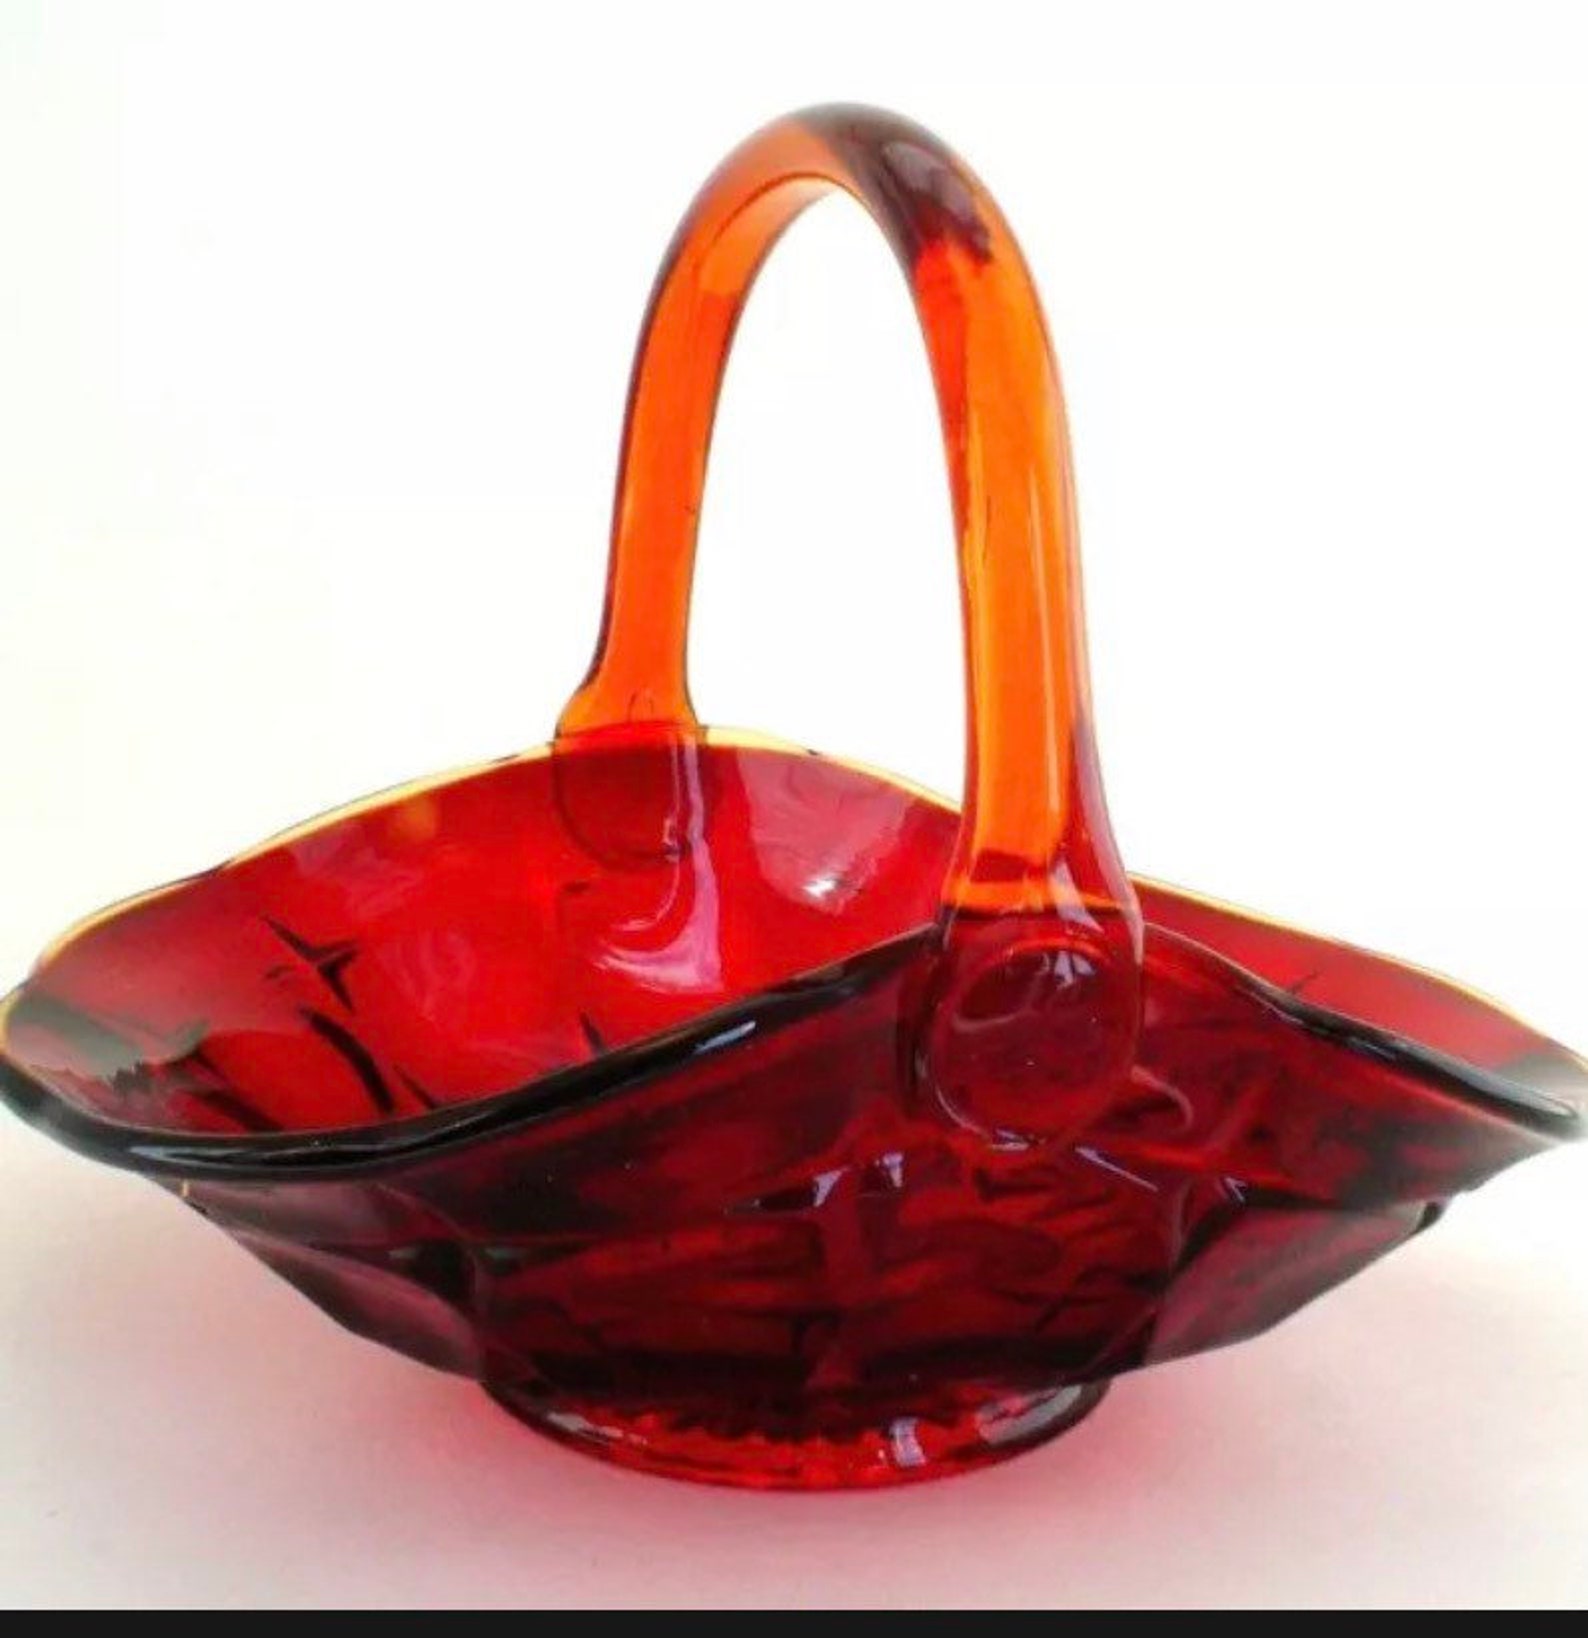 Amberina art glass basket. Ruby red and amber glass. Indiana | Etsy